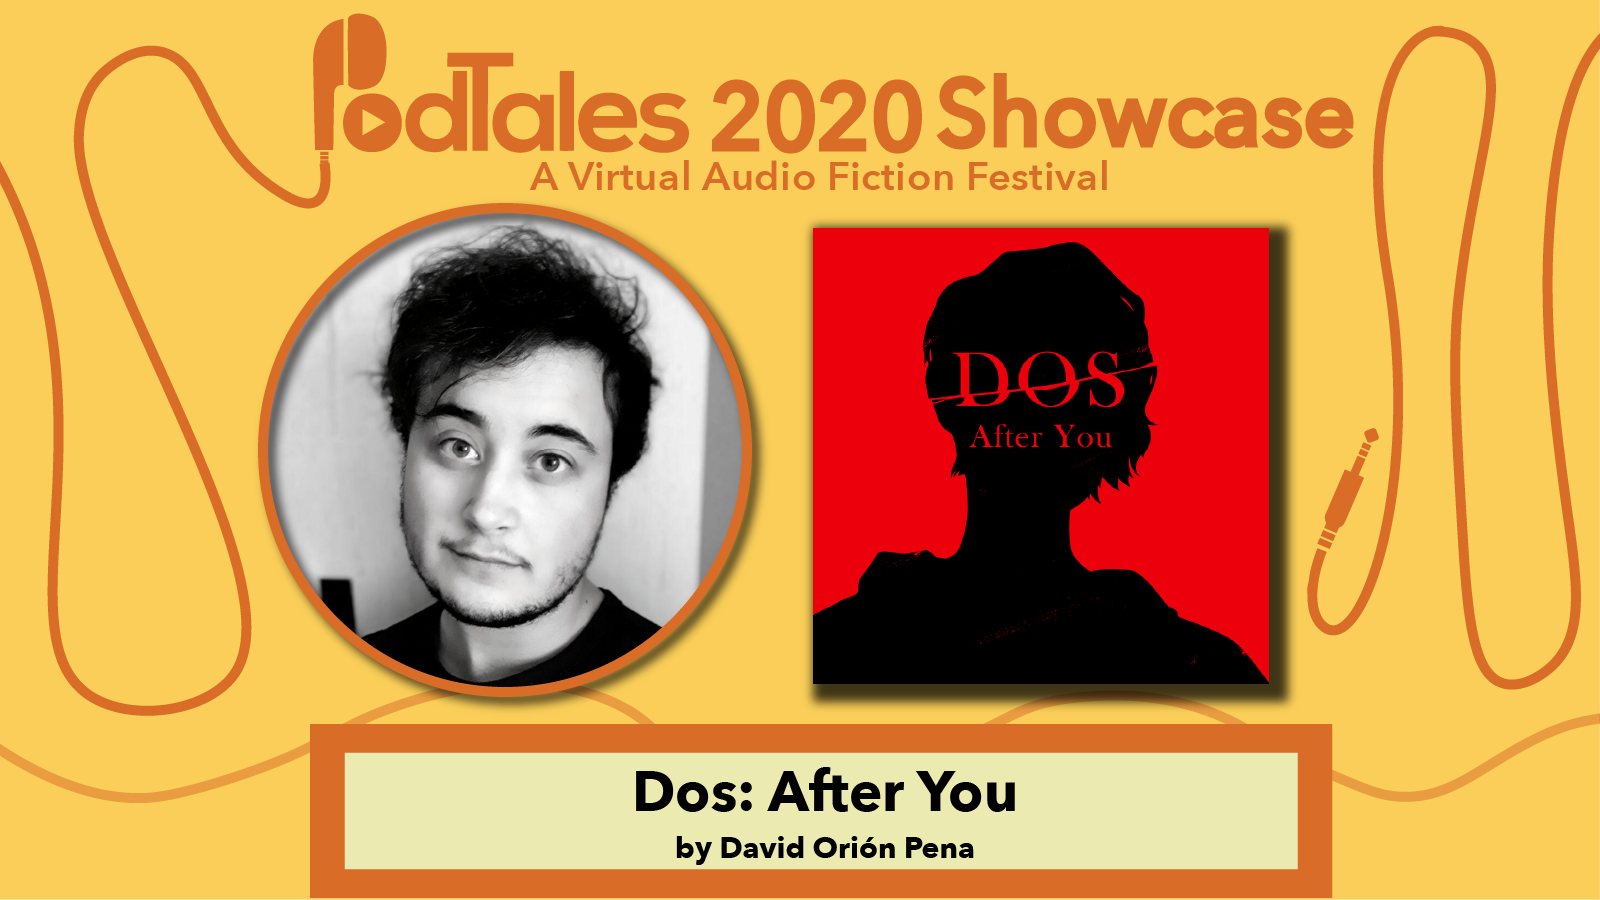 Text reading “PodTales 2020 Showcase: A Virtual Audio Fiction Festival”, Photo of David Orion Pena, Show Art for Dos: After You, Text reading “Dos: After You by David Orion Pena”